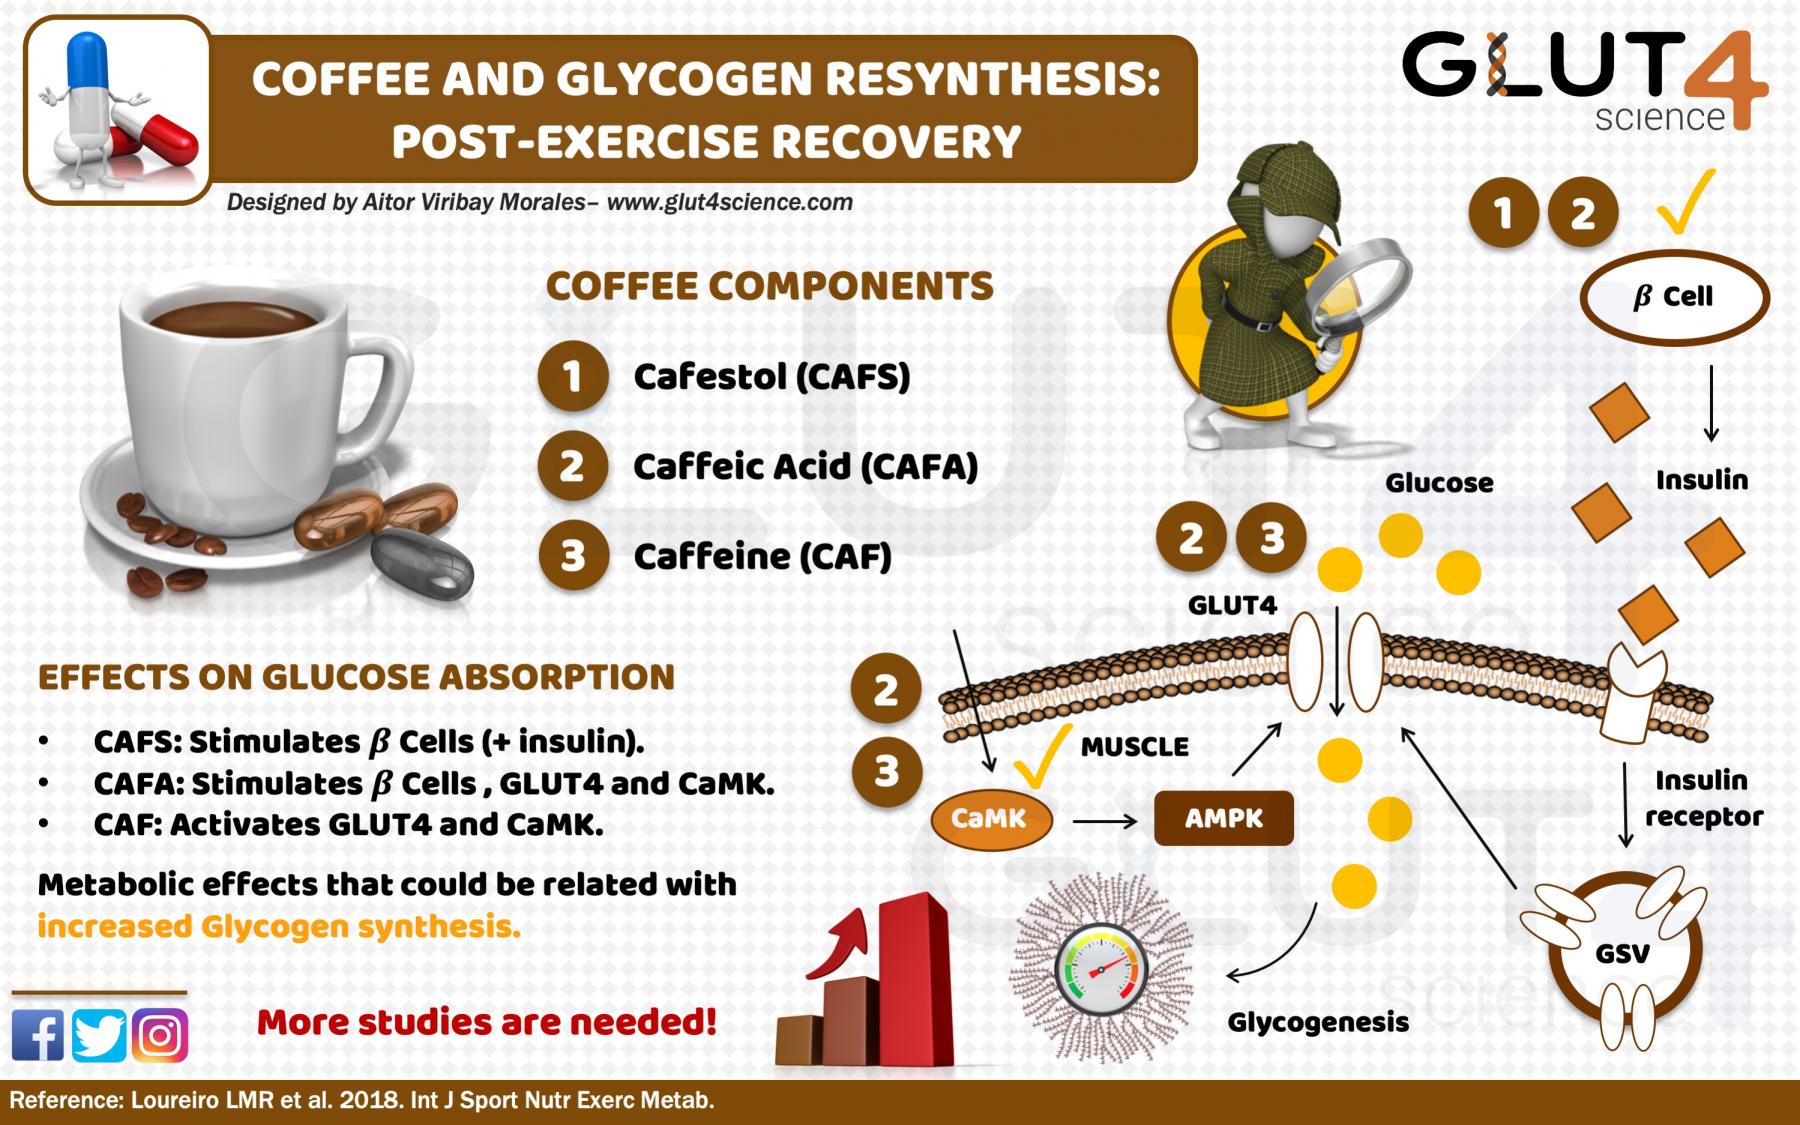 Coffee and glycogen resynthesis